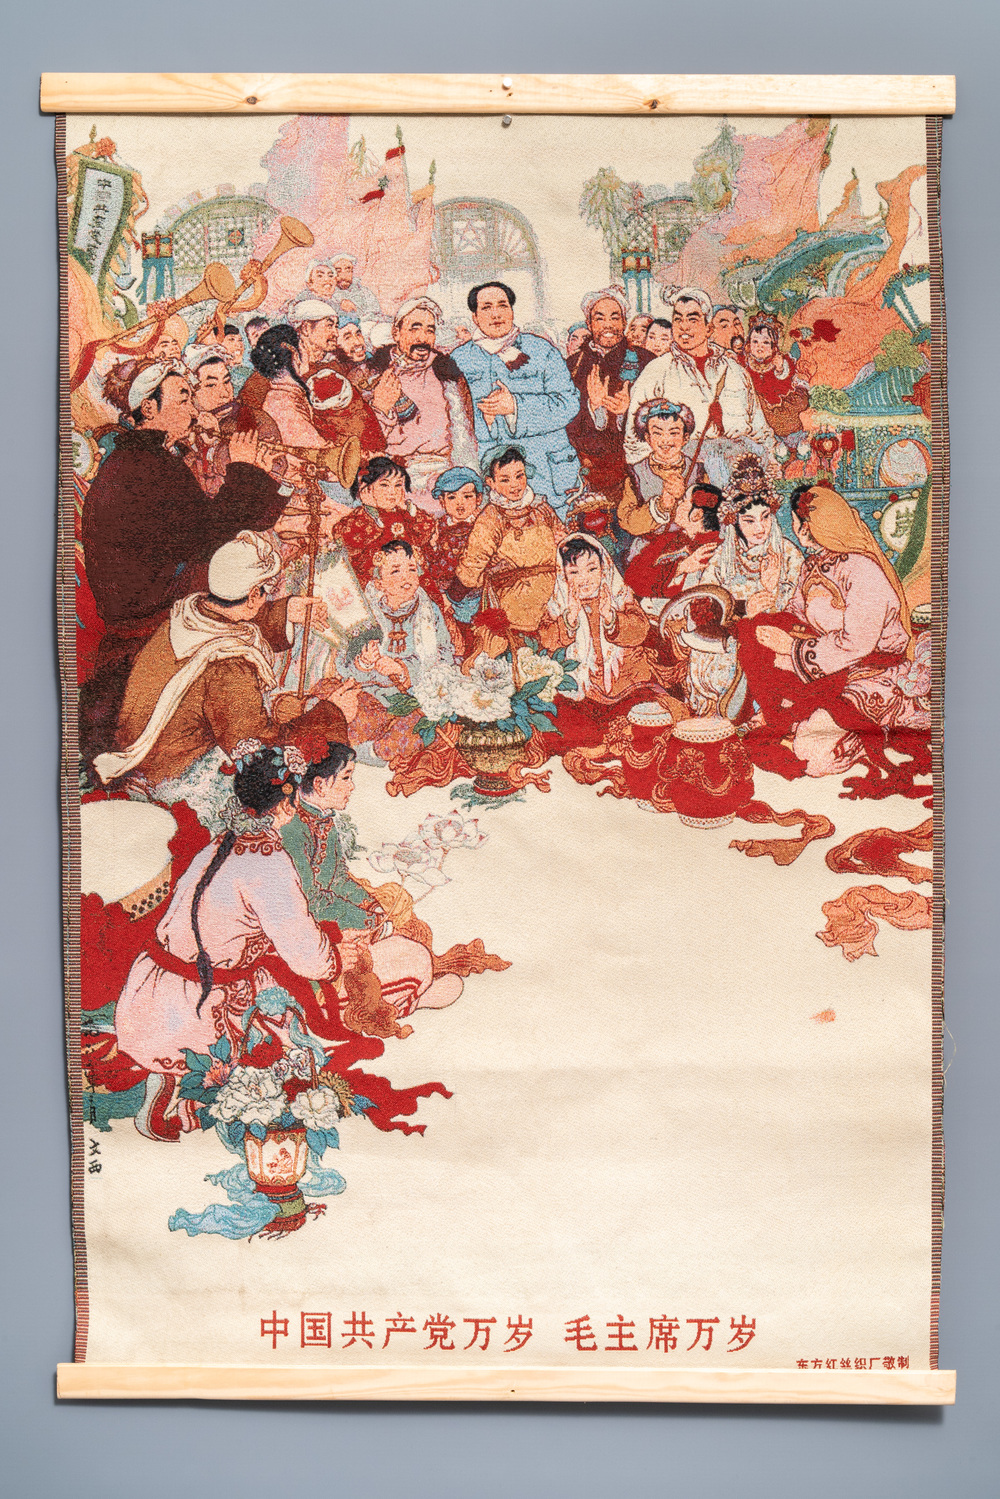 A Chinese Cultural Revolution wall hanging tapestry, 3rd quarter 20th C.